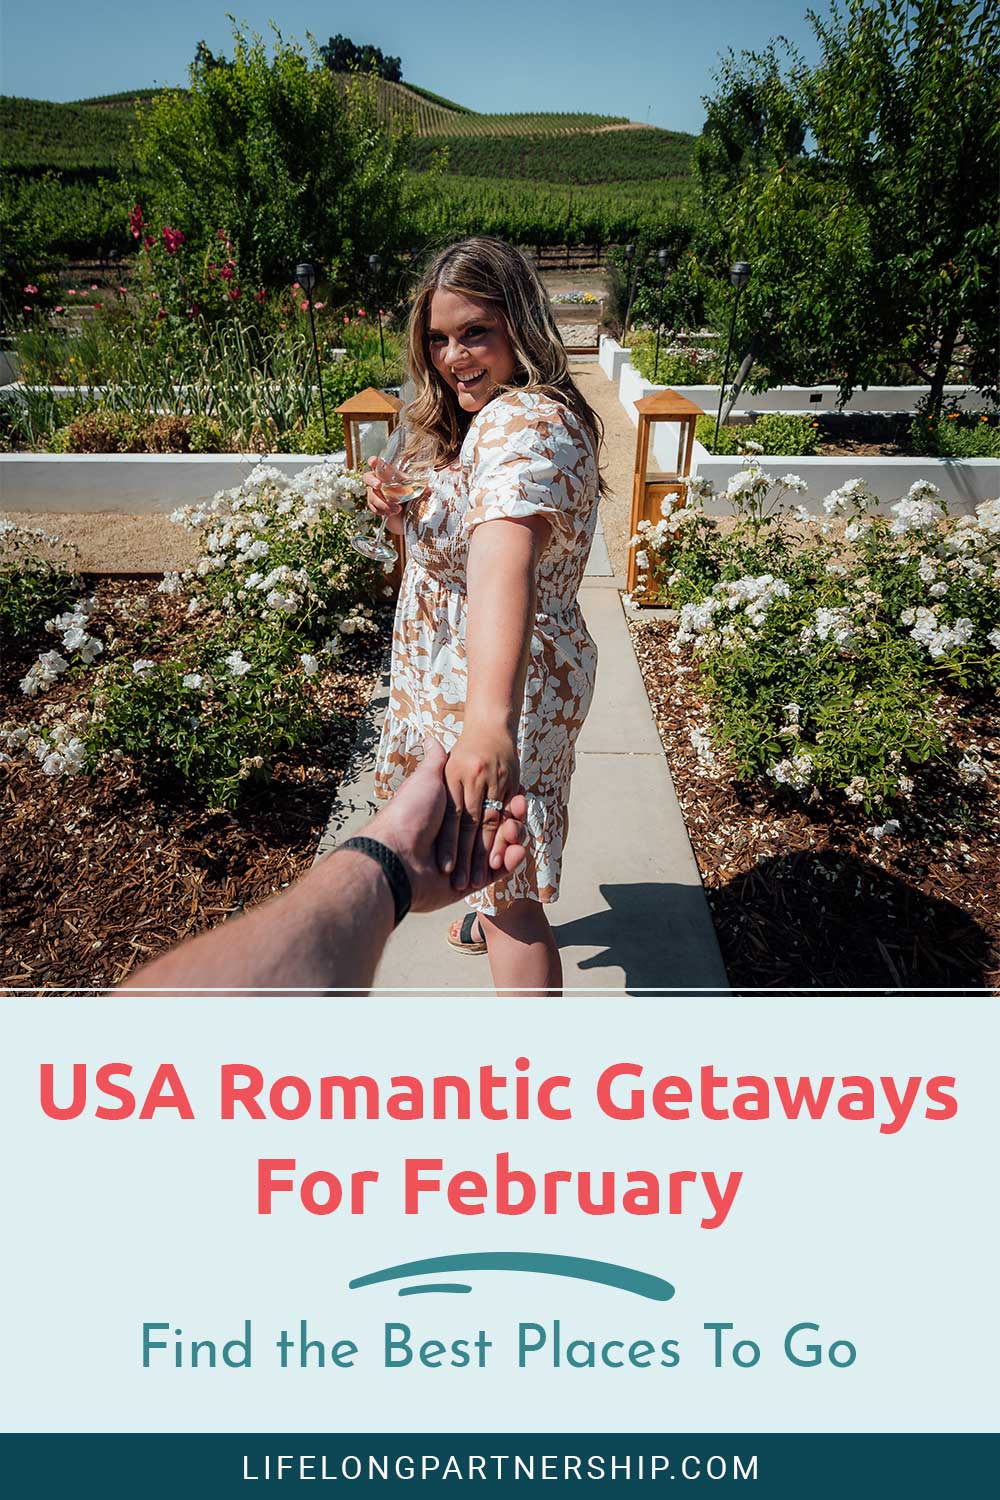 USA Romantic Getaways For February – Find the Best Places To Go